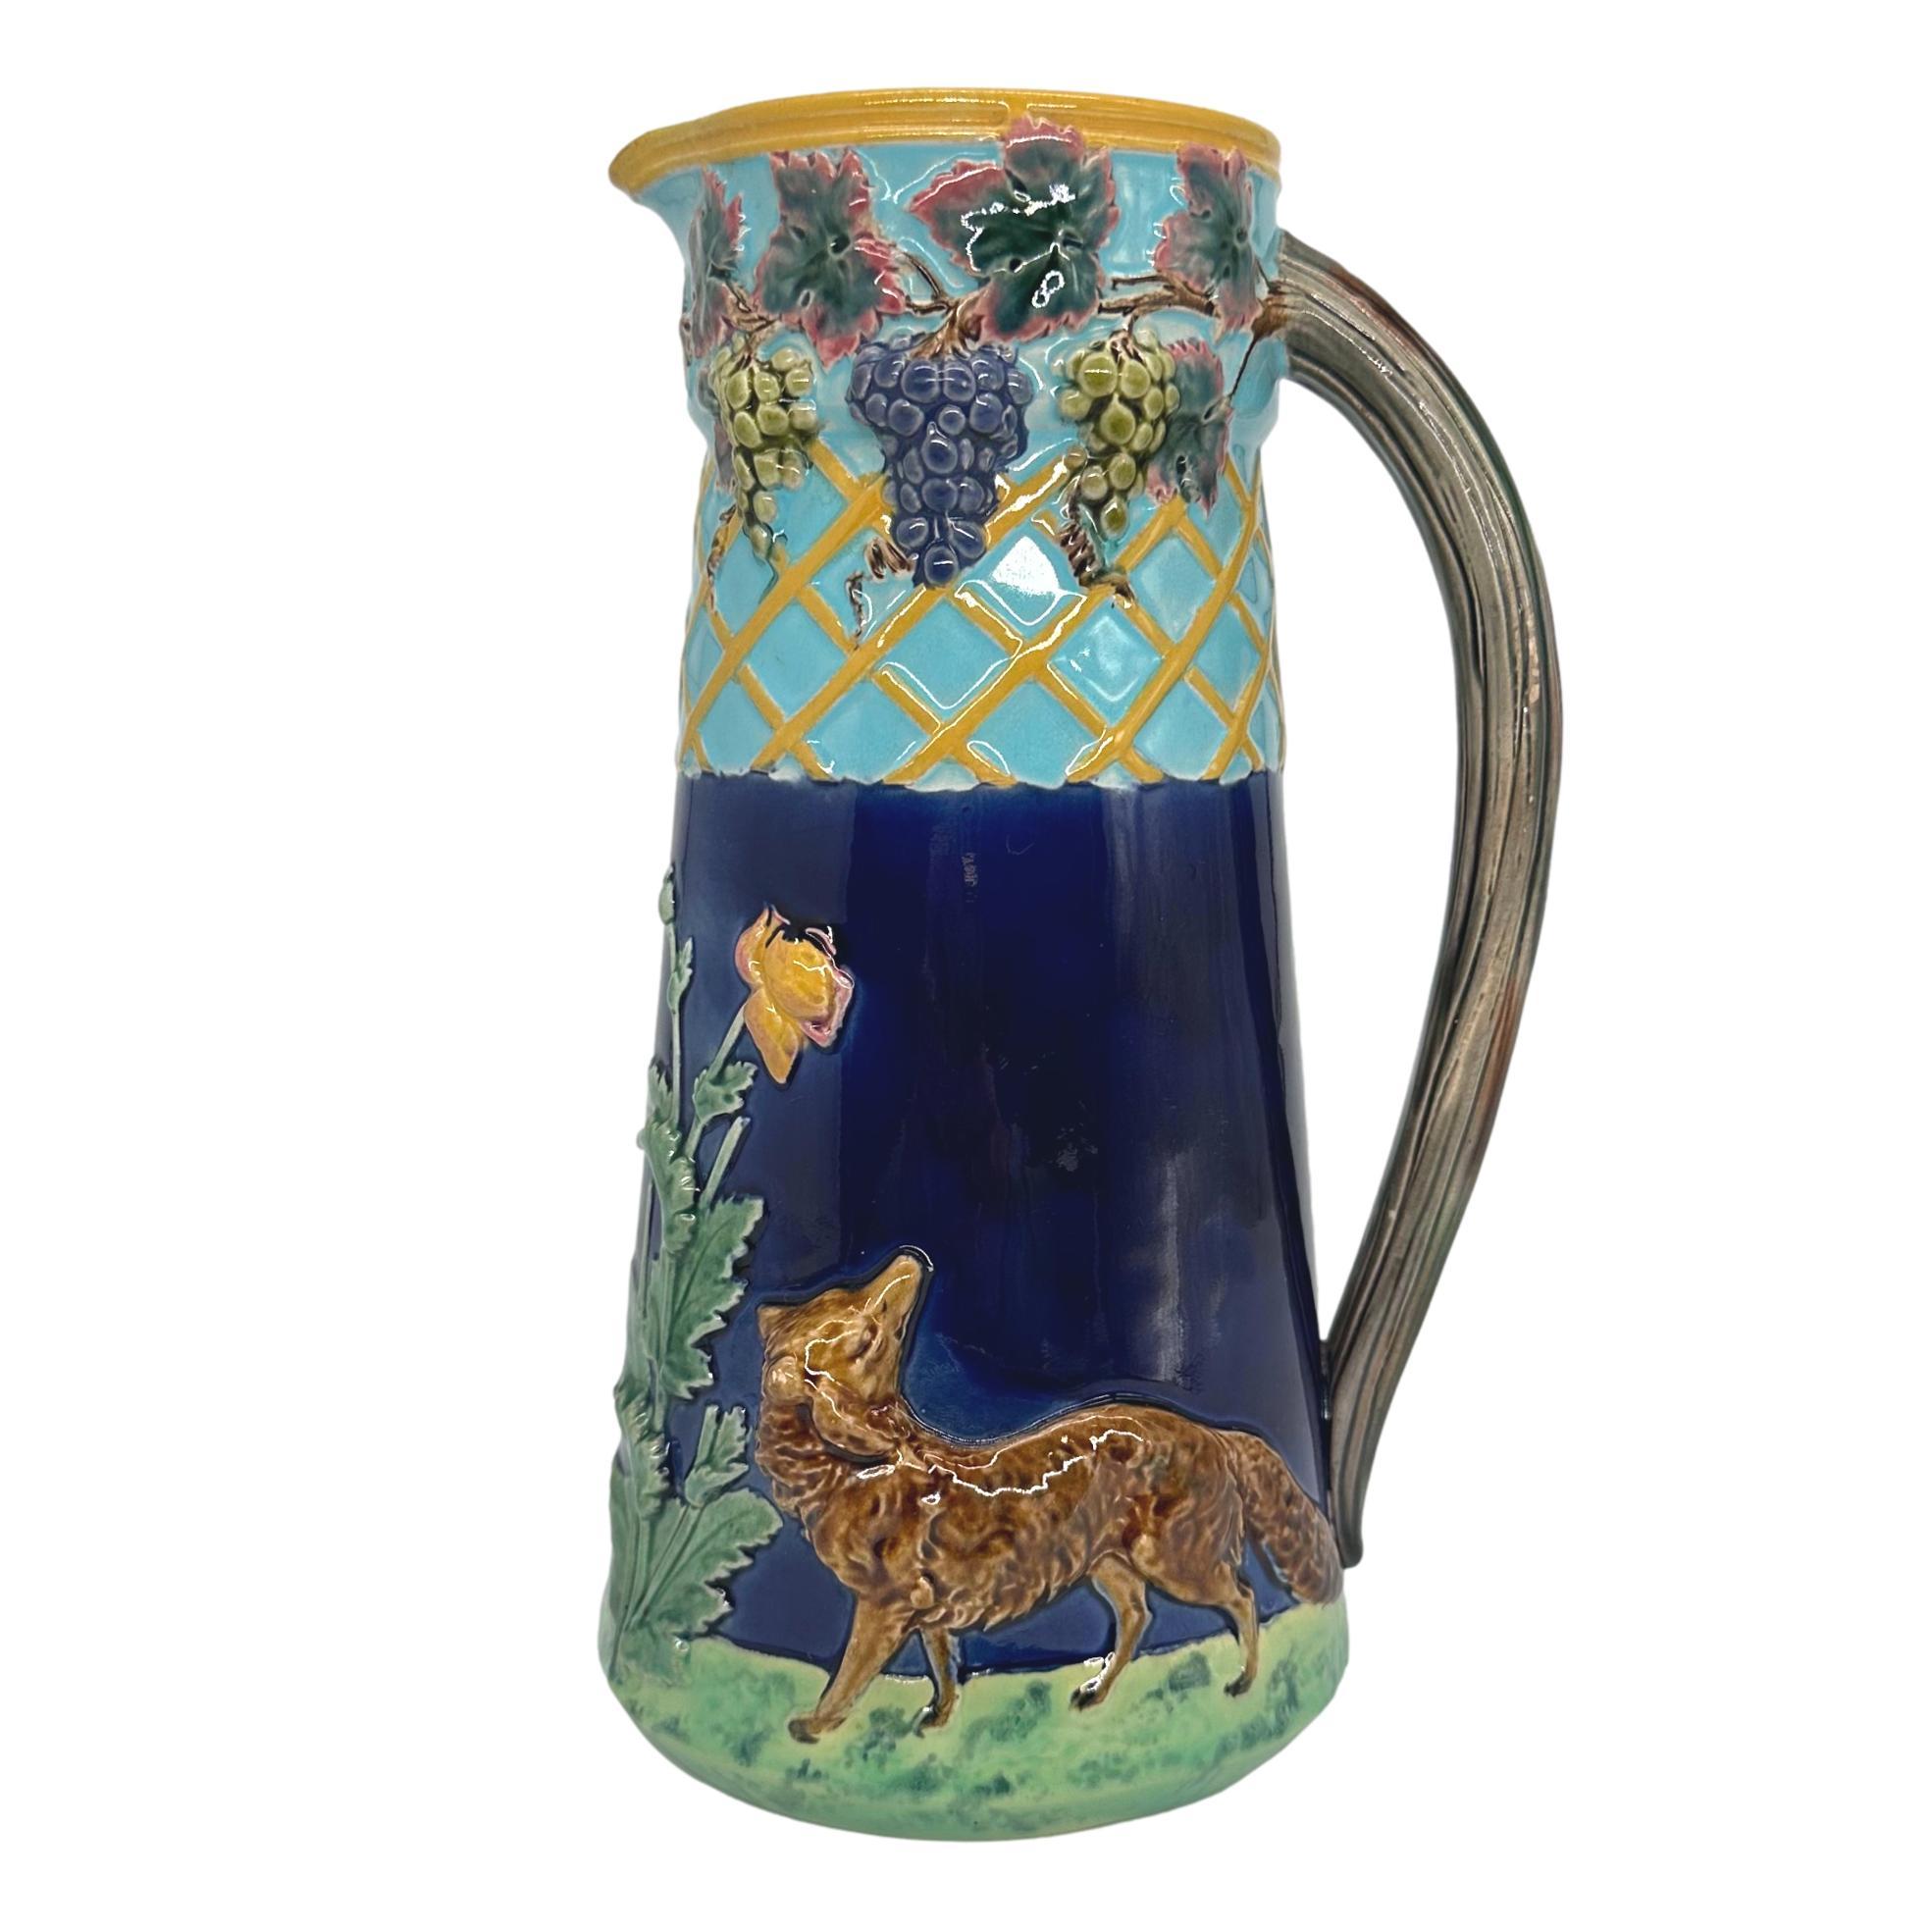 T.C. Brown-Westhead, Moore & Co. Majolica Jug Depicting 'The Fox and the Grapes from Aesop's Fables, with a molded and applied fox to each side and glazed in deep cobalt blue, the top portion with yellow trellis-work laden with colorfully glazed